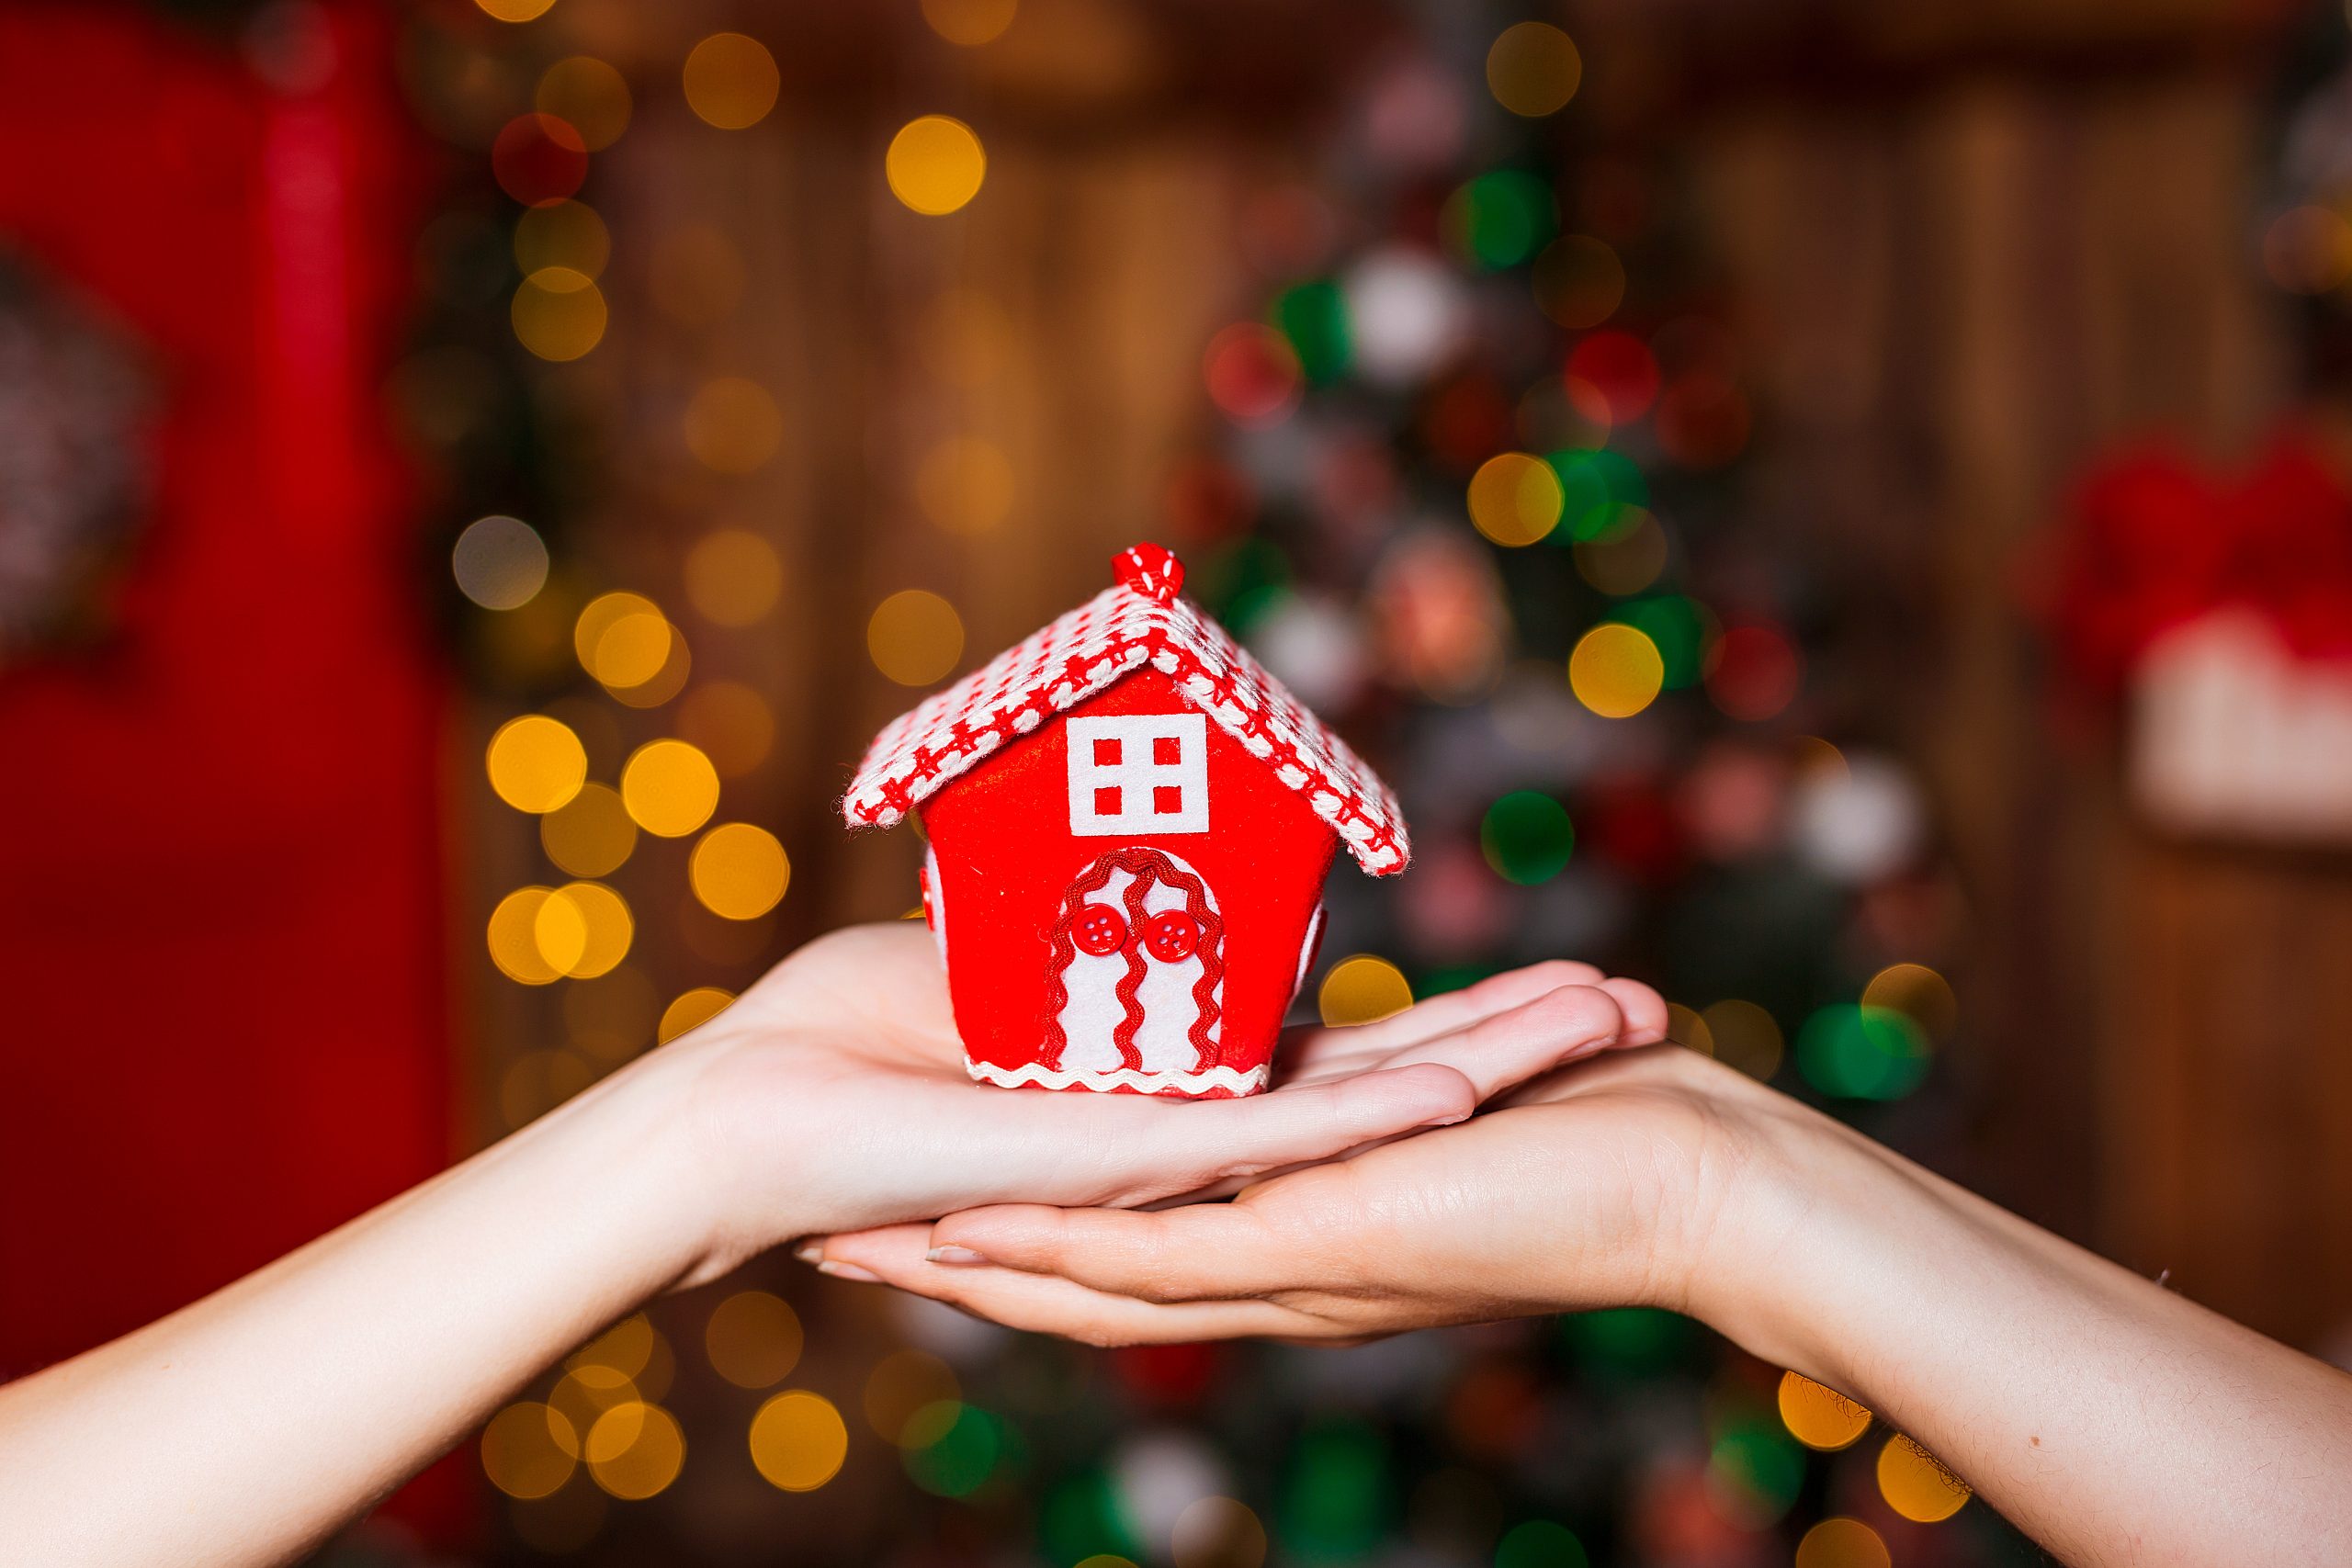 Human hands holding decorative red house against blurred background. Christmas and home comfort concept